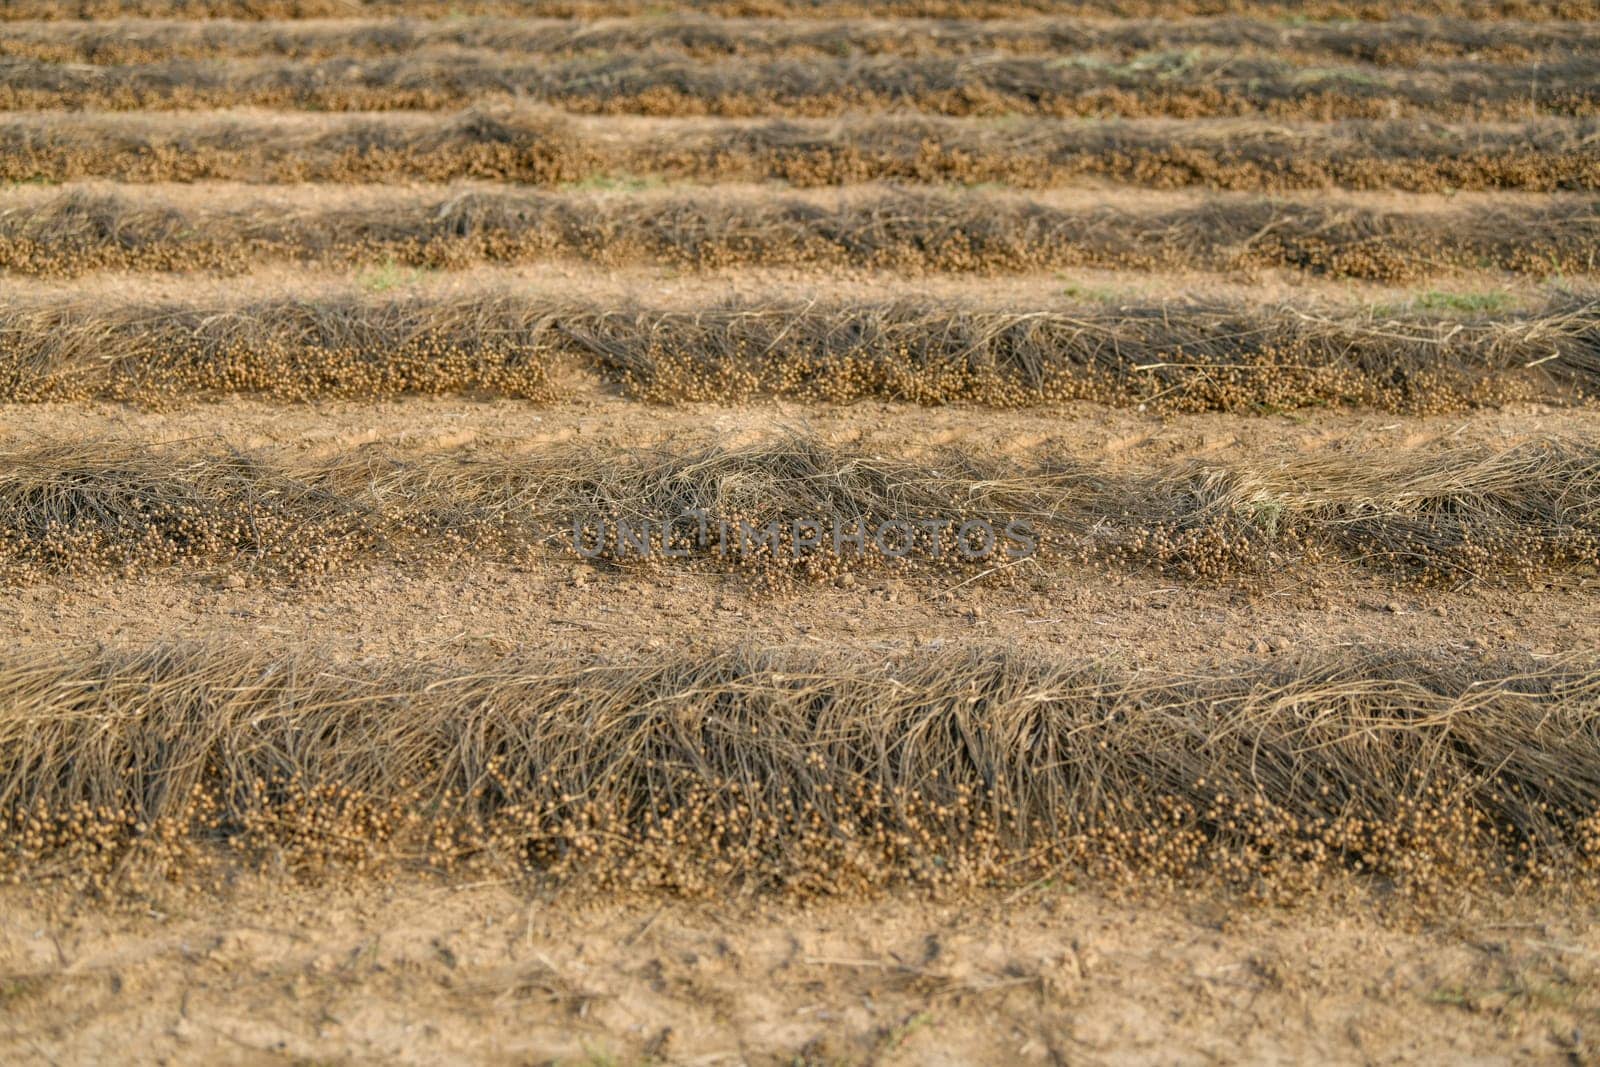 Lines on the ground of dry flax for harvesting by Godi